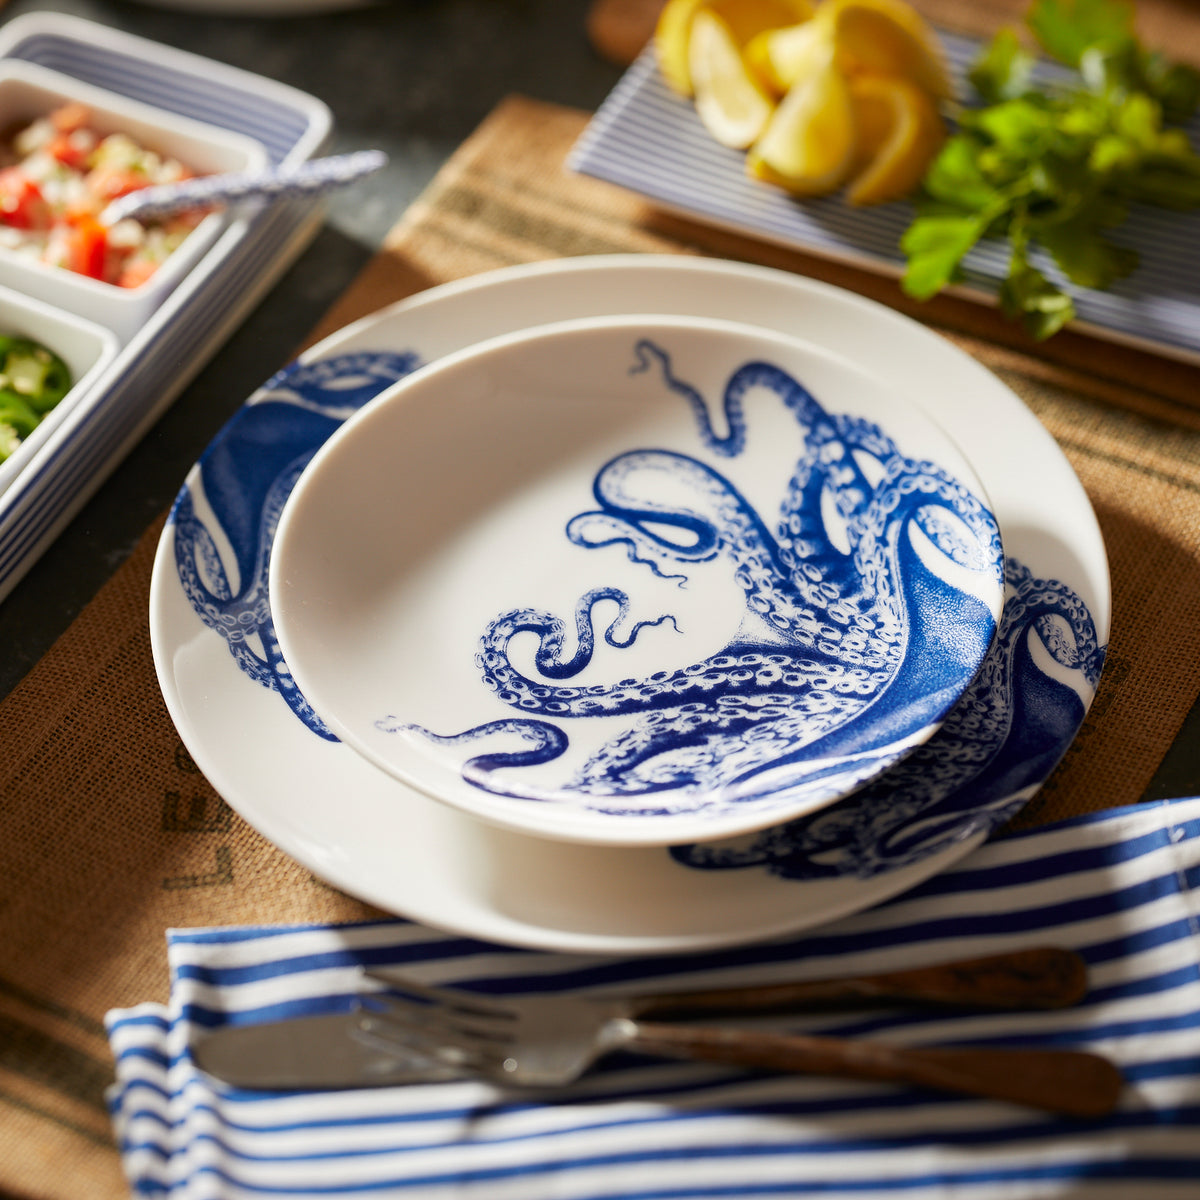 A table setting with a creamy white premium porcelain Lucy Coupe Salad Plate and bowl adorned with blue octopus designs by Caskata Artisanal Home, placed on a woven mat, alongside a striped napkin, silverware, and a tray of cut vegetables and lemon wedges. The contemporary shape adds elegance while being dishwasher and microwave safe.